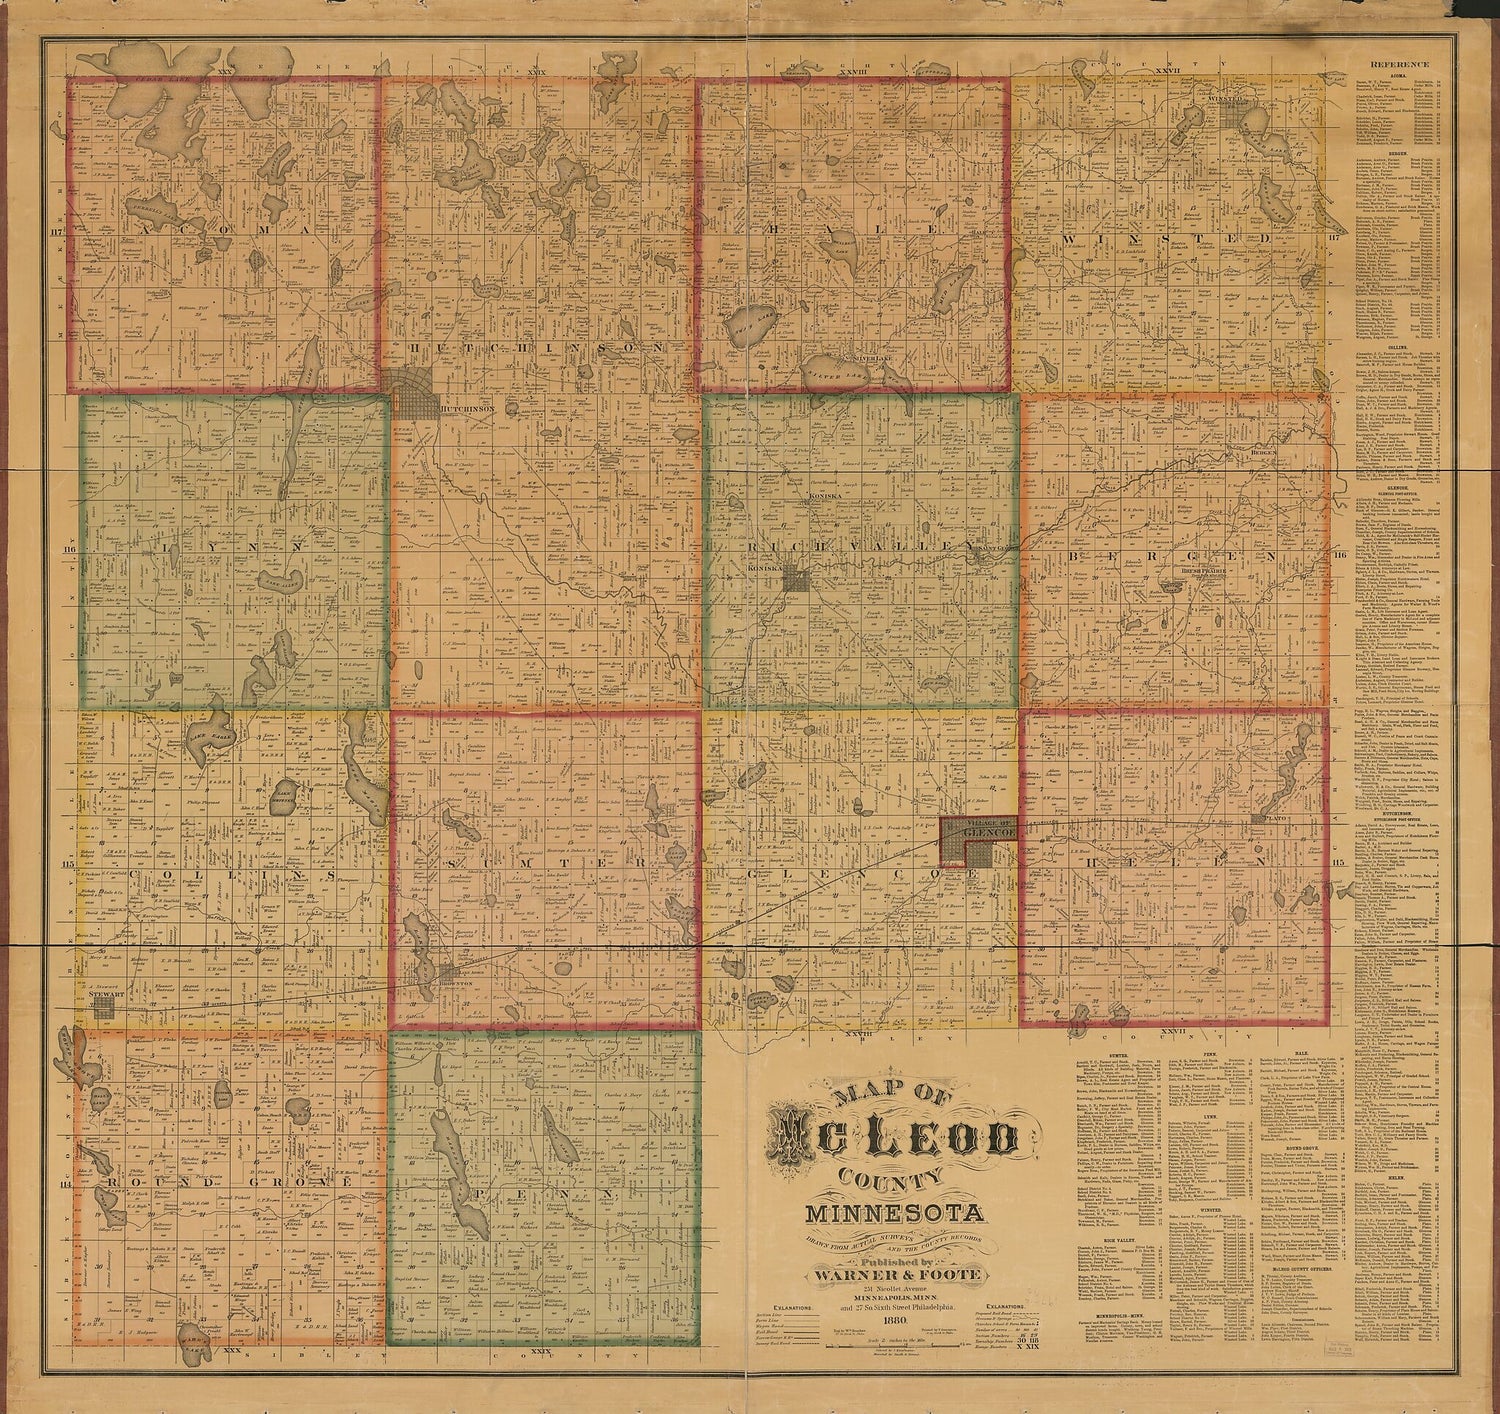 This old map of Map of McLeod County, Minnesota : Drawn from Actual Surveys and the County Records from 1880 was created by Wm. (William) Bracher,  Warner &amp; Foote in 1880